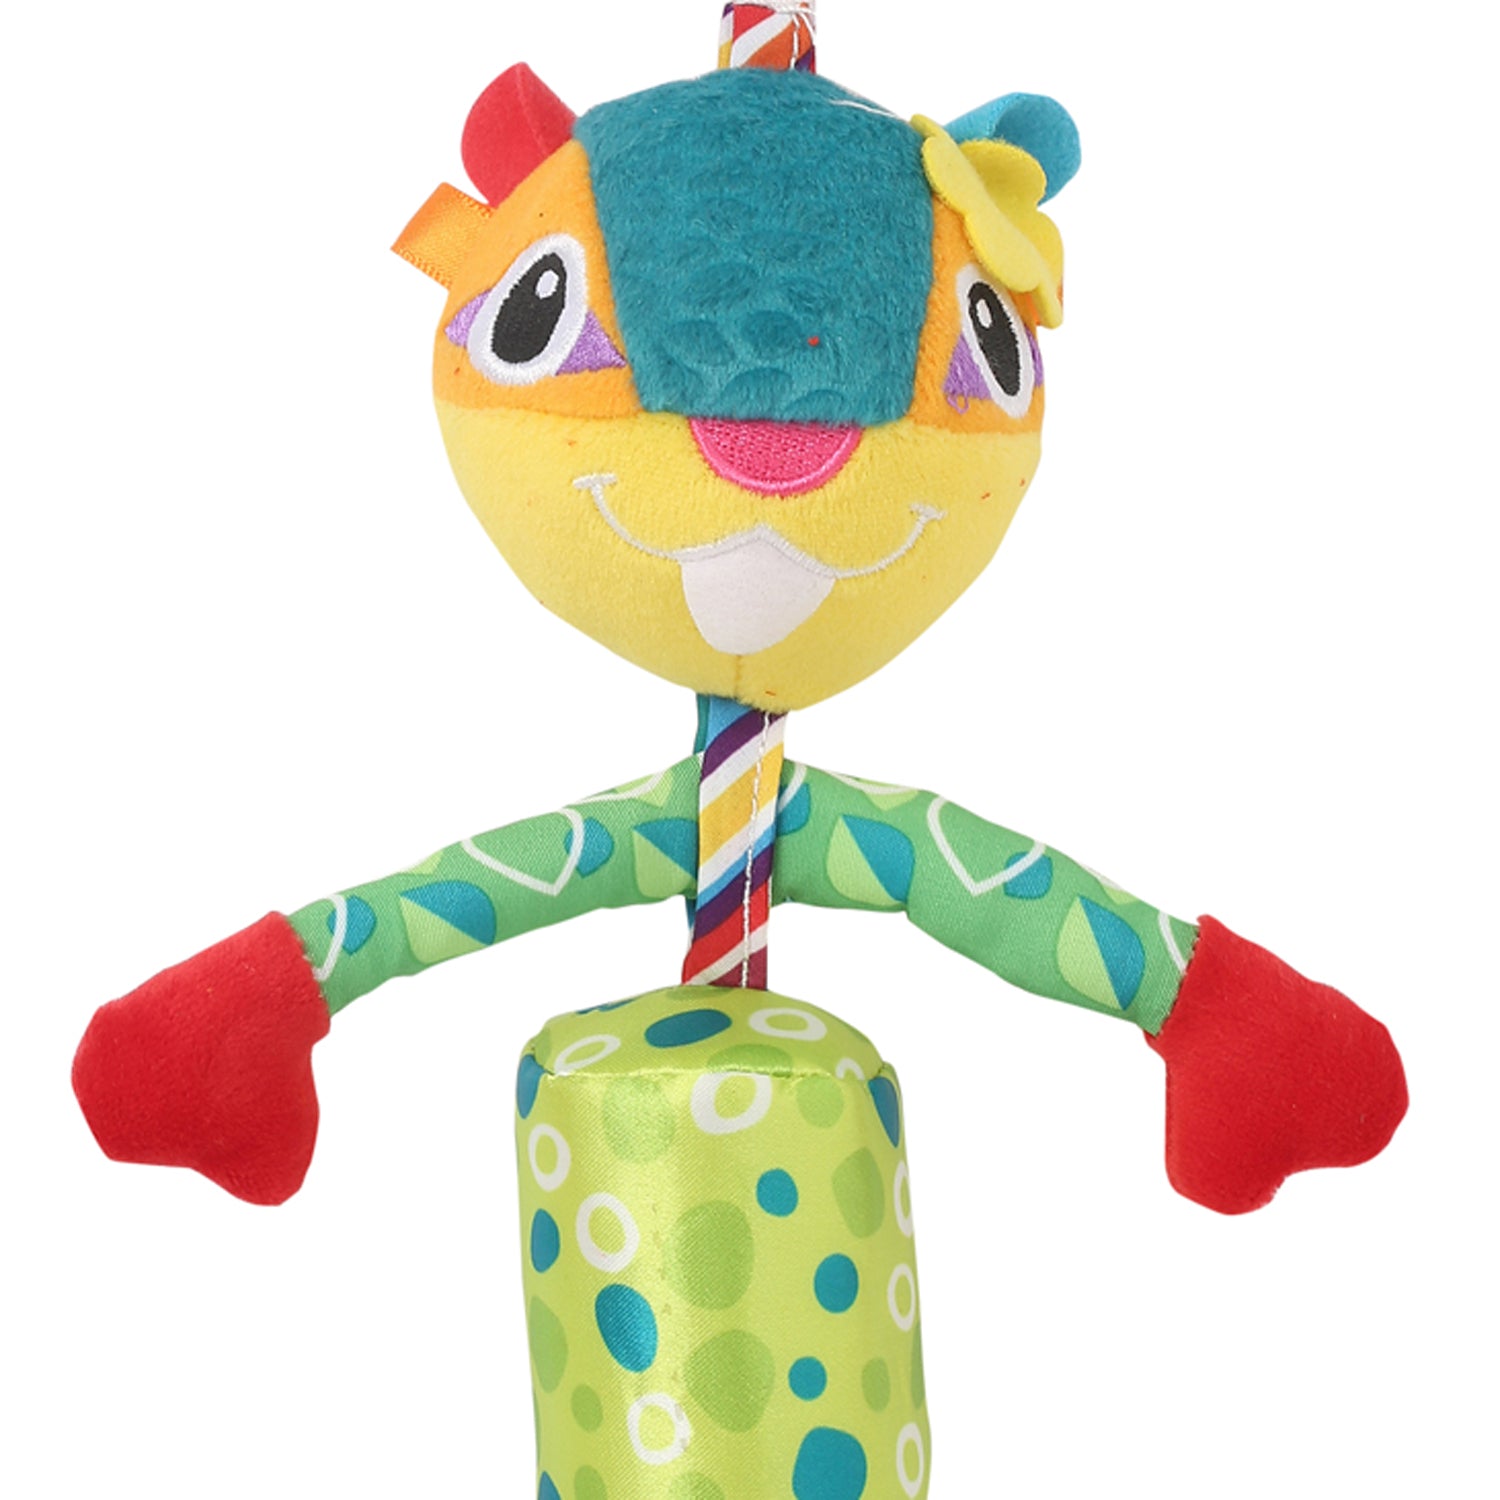 Smiling Green Hanging Musical Toy / Wind Chime Soft Rattle